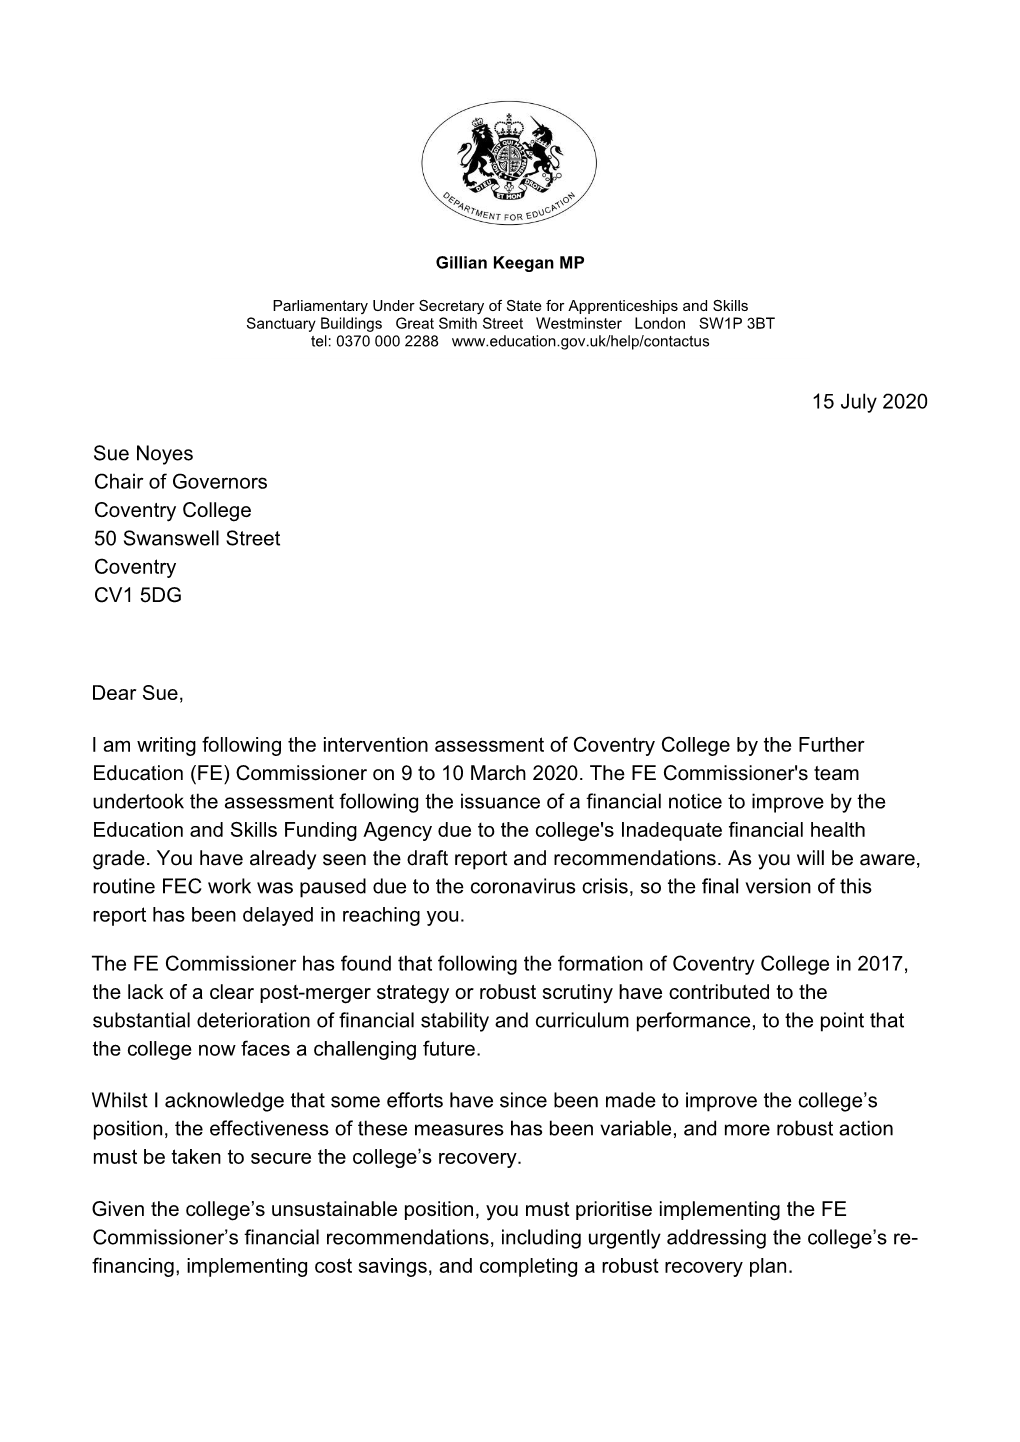 Coventry College Letter to Chair